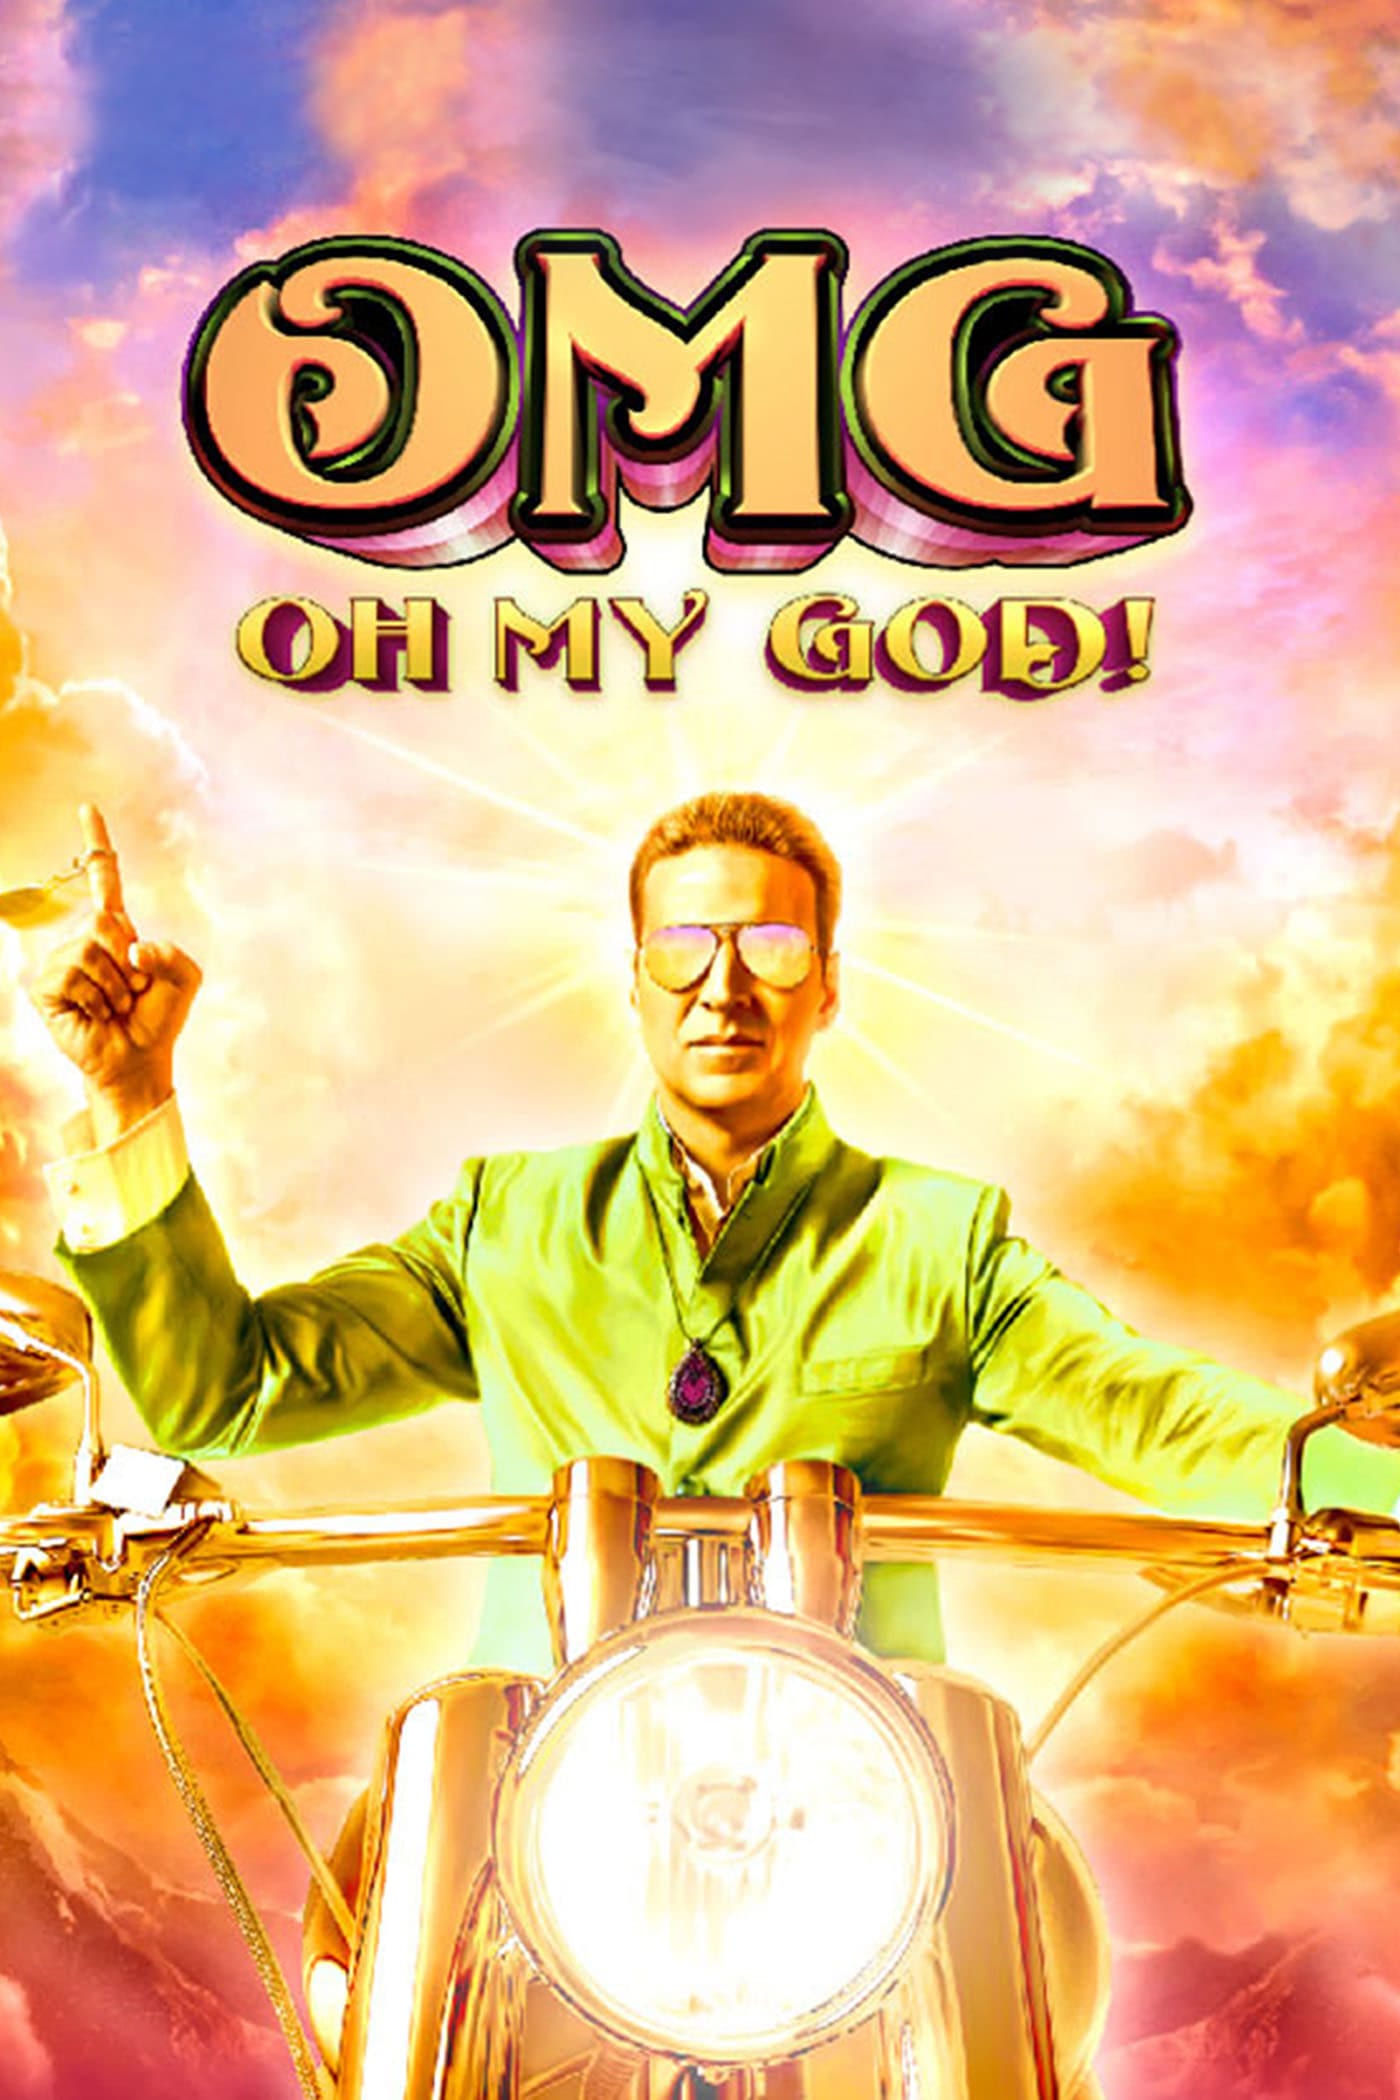 Poster for the movie "OMG: Oh My God!"